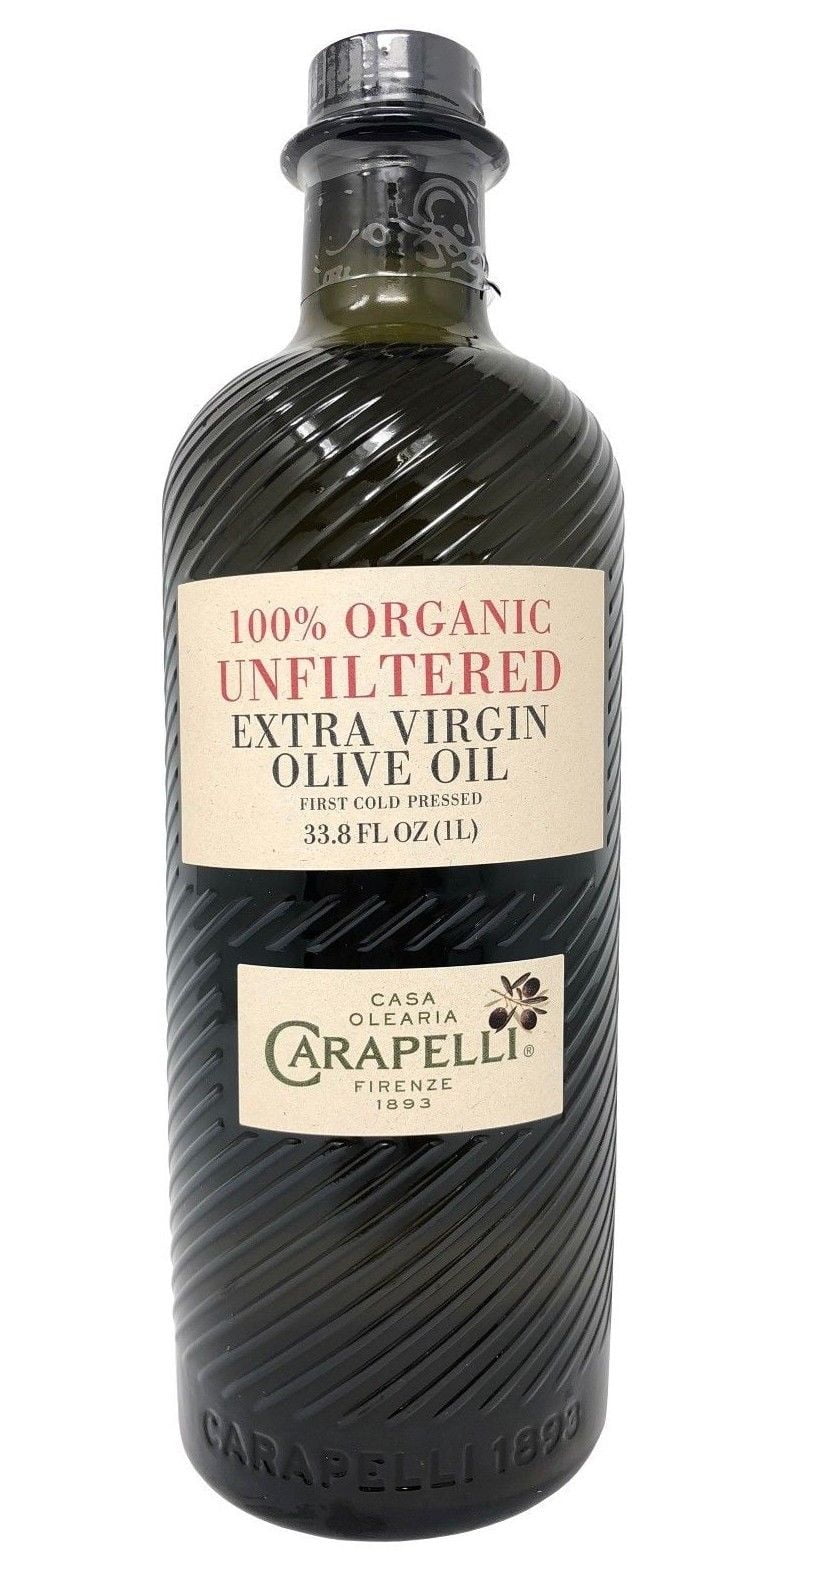 Carapelli 100 Organic Unfiltered Extra Virgin Olive Oil